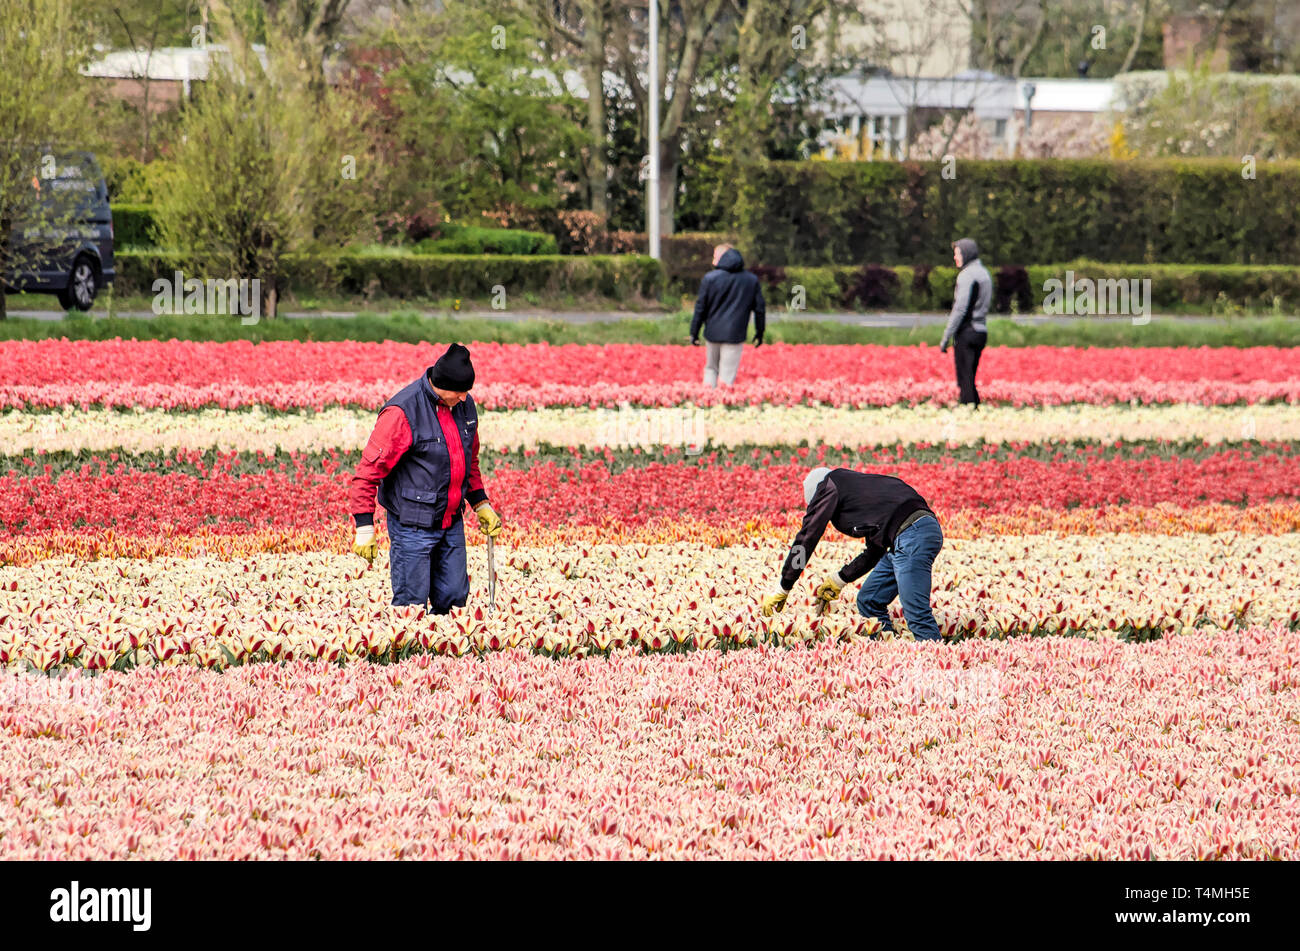 Noordwijkerhout, The Netherlands, April 15, 2019: four labourers at work in multi-colored tulip fieds Stock Photo